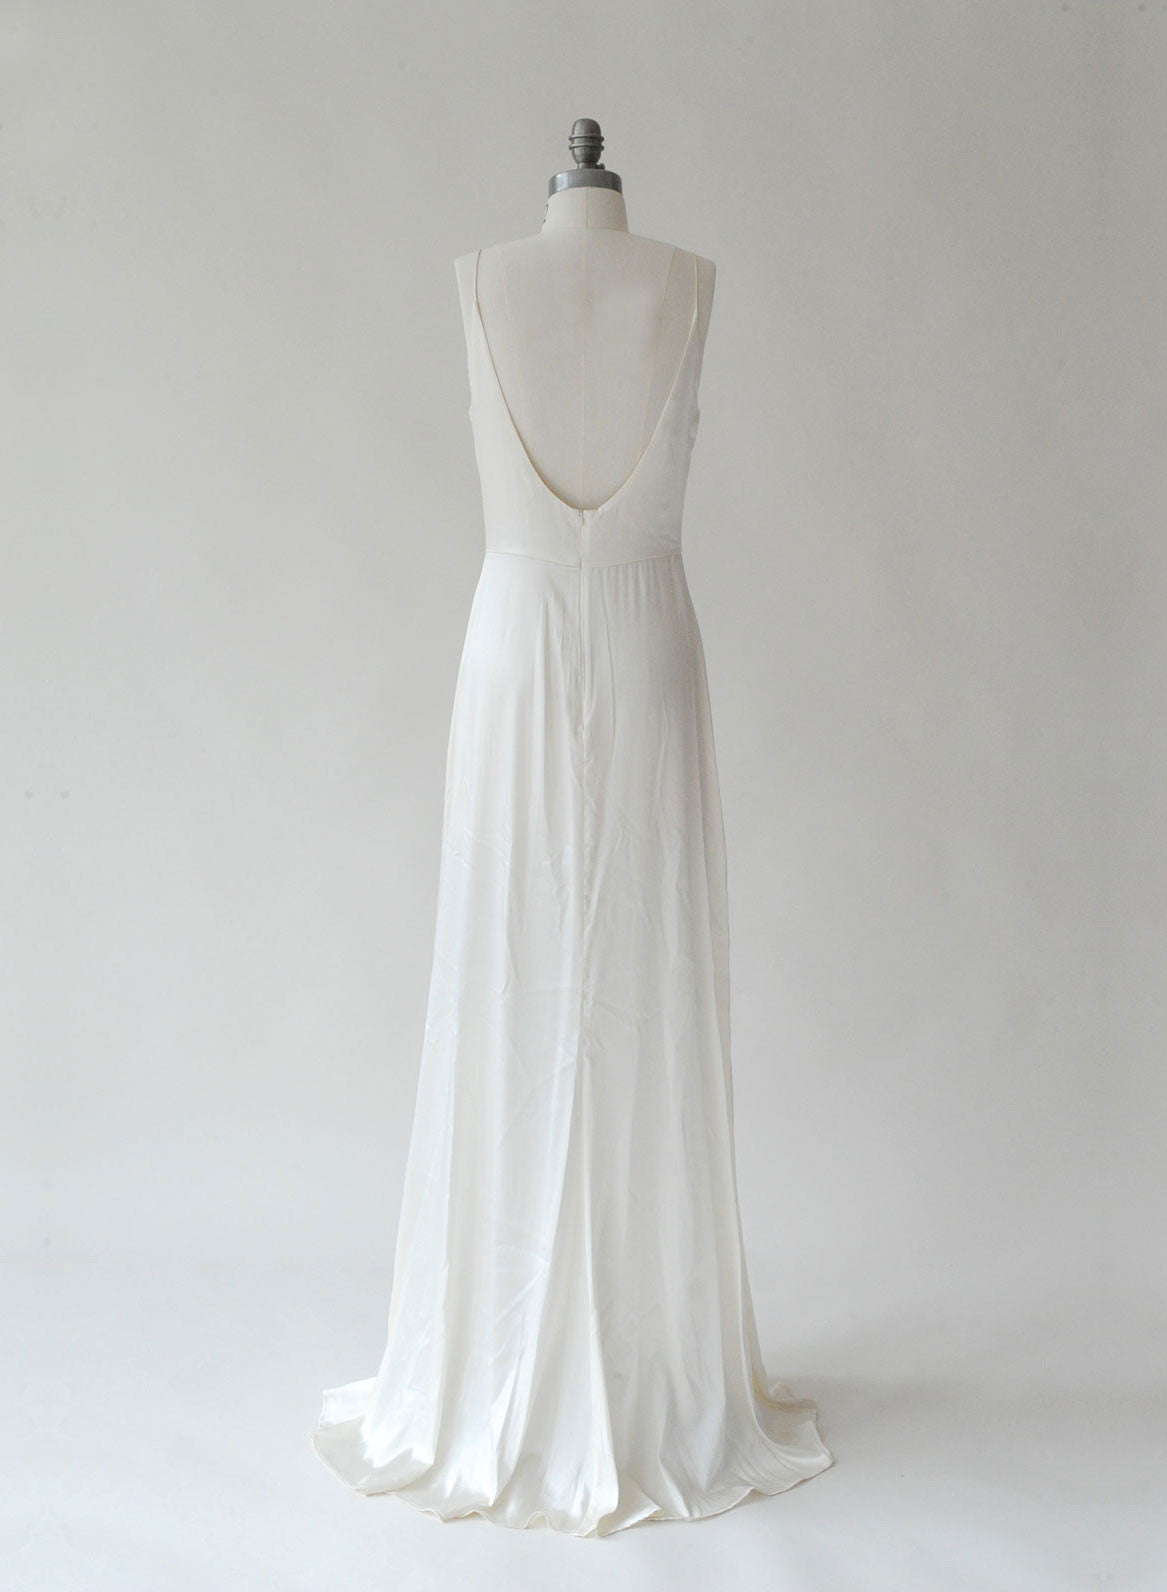 Fitted silk slip dress - Style # TH012